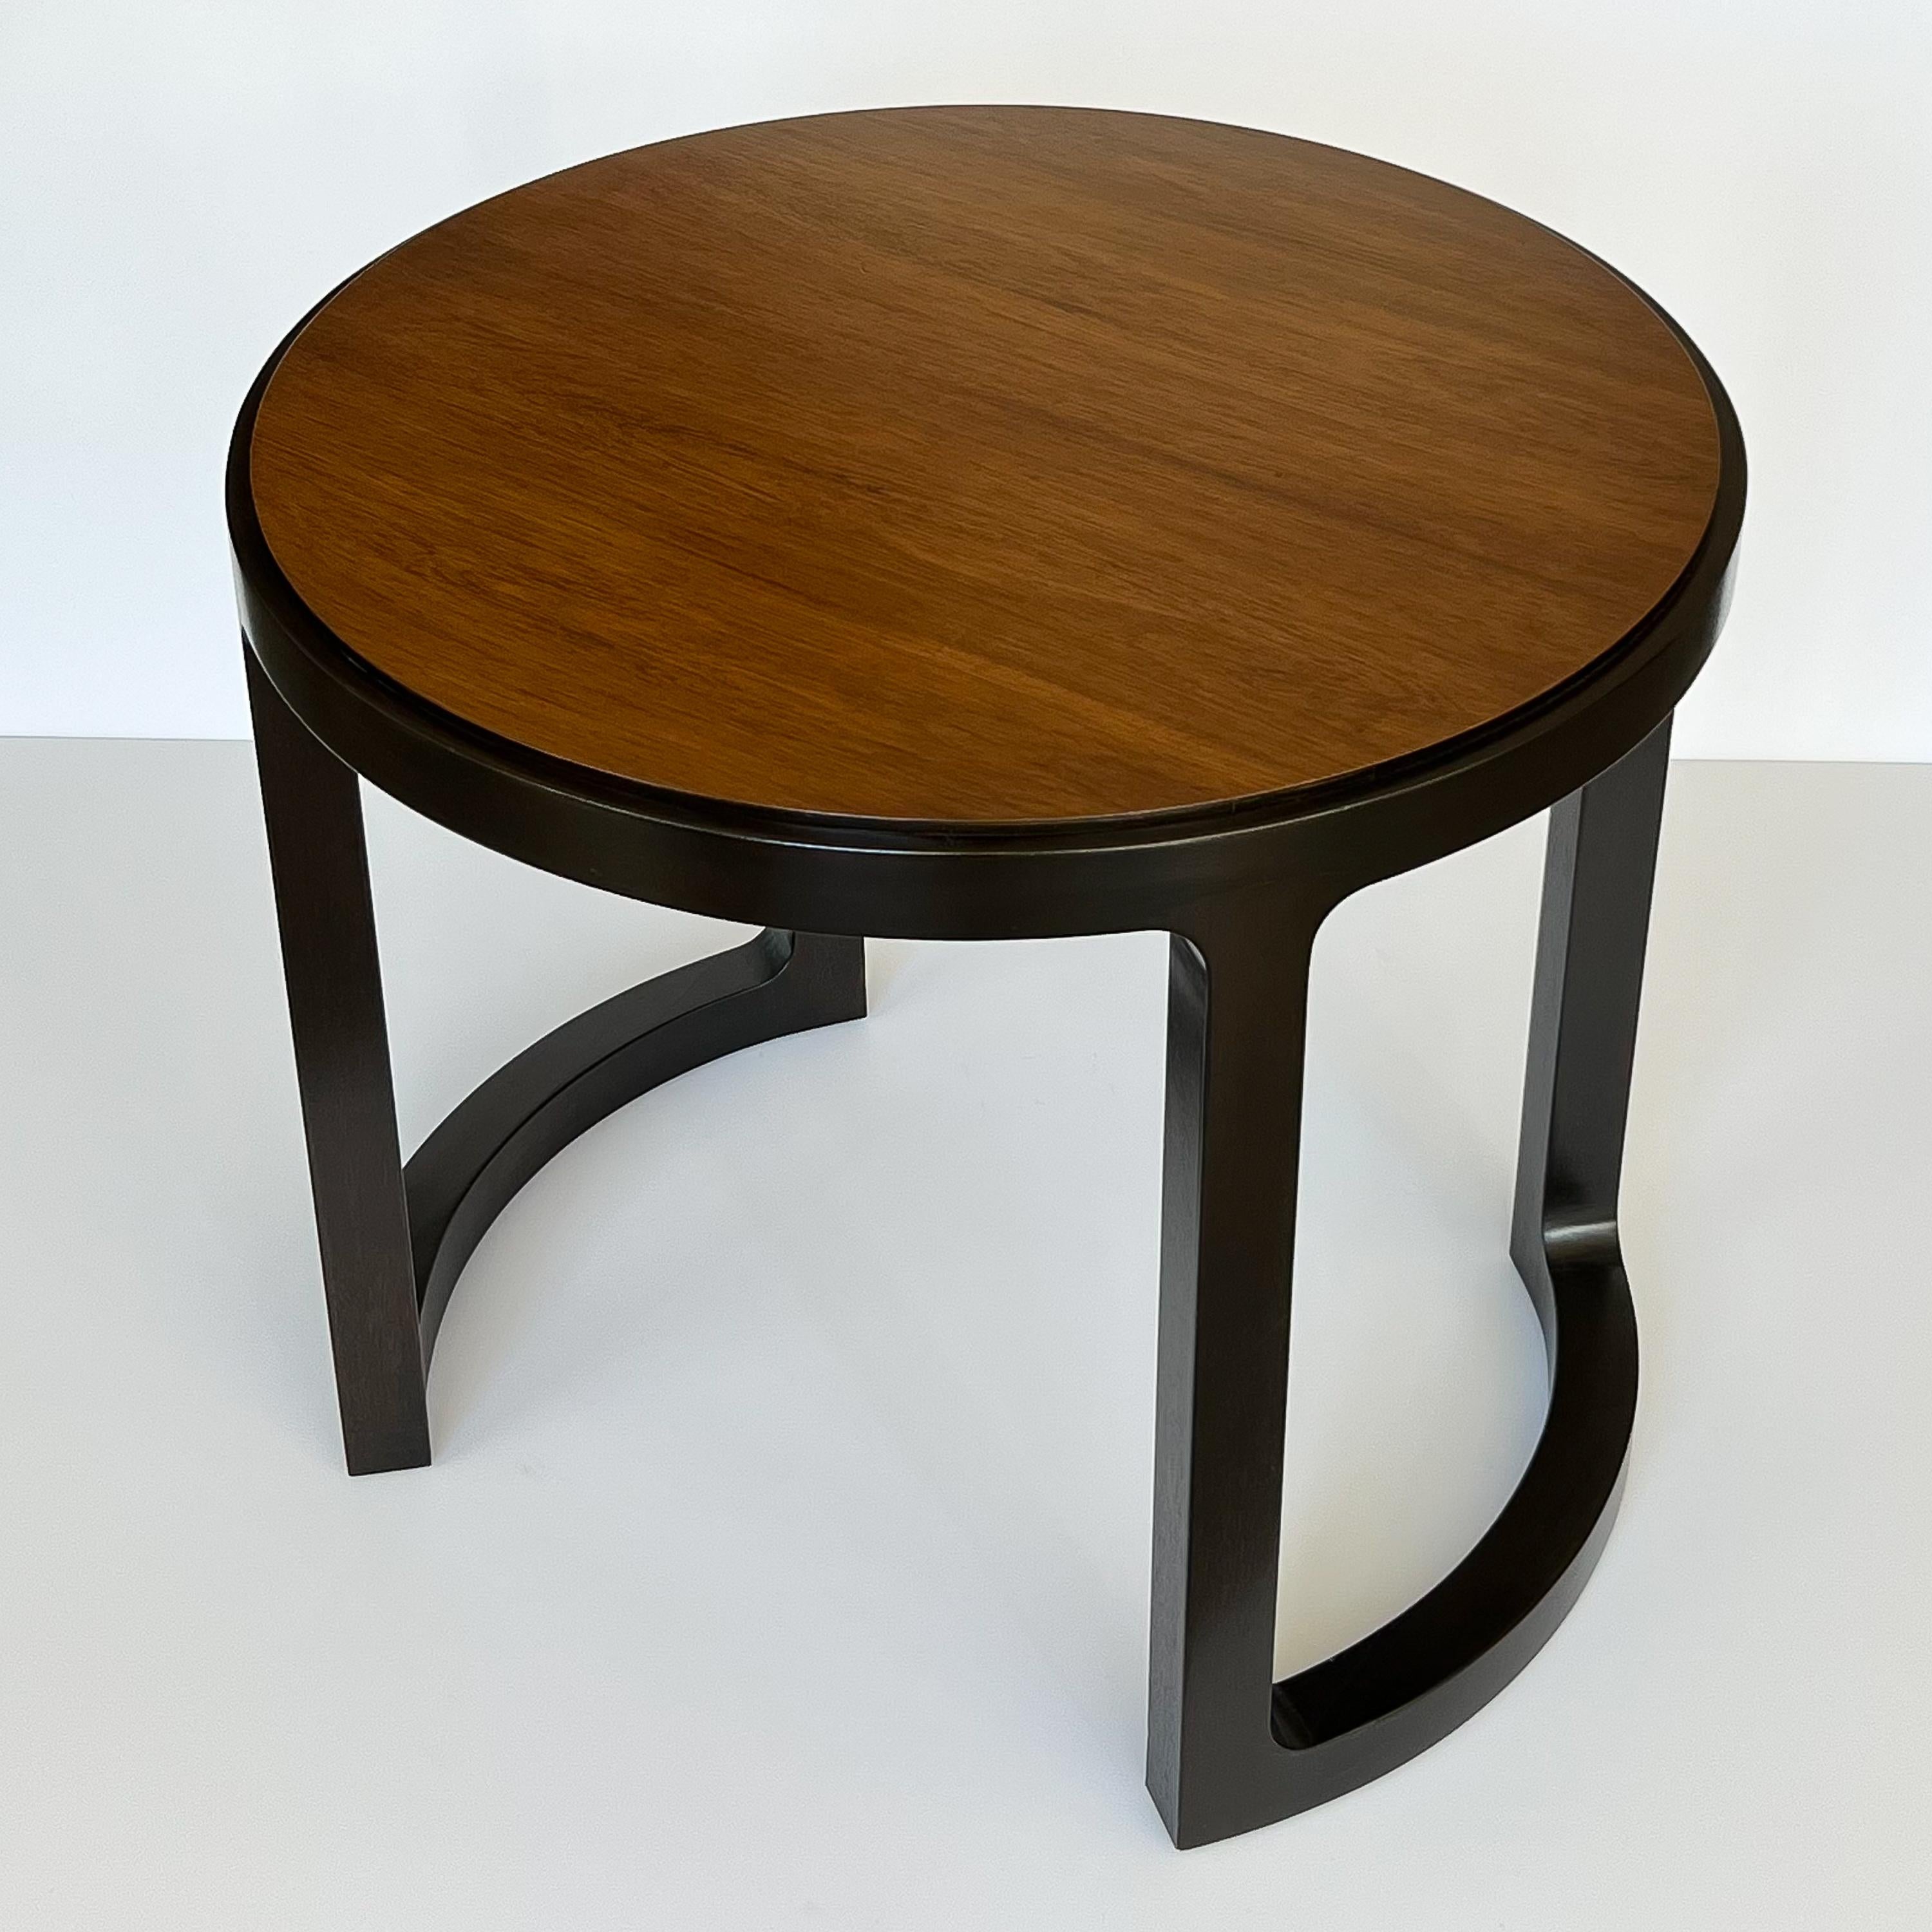 A stunning Mid-Century Modern walnut and mahogany round end table or side table by renowned designer Edward Wormley for Dunbar Furniture, circa 1960s. This exquisitely designed piece offers a perfect blend of form and function, making it an